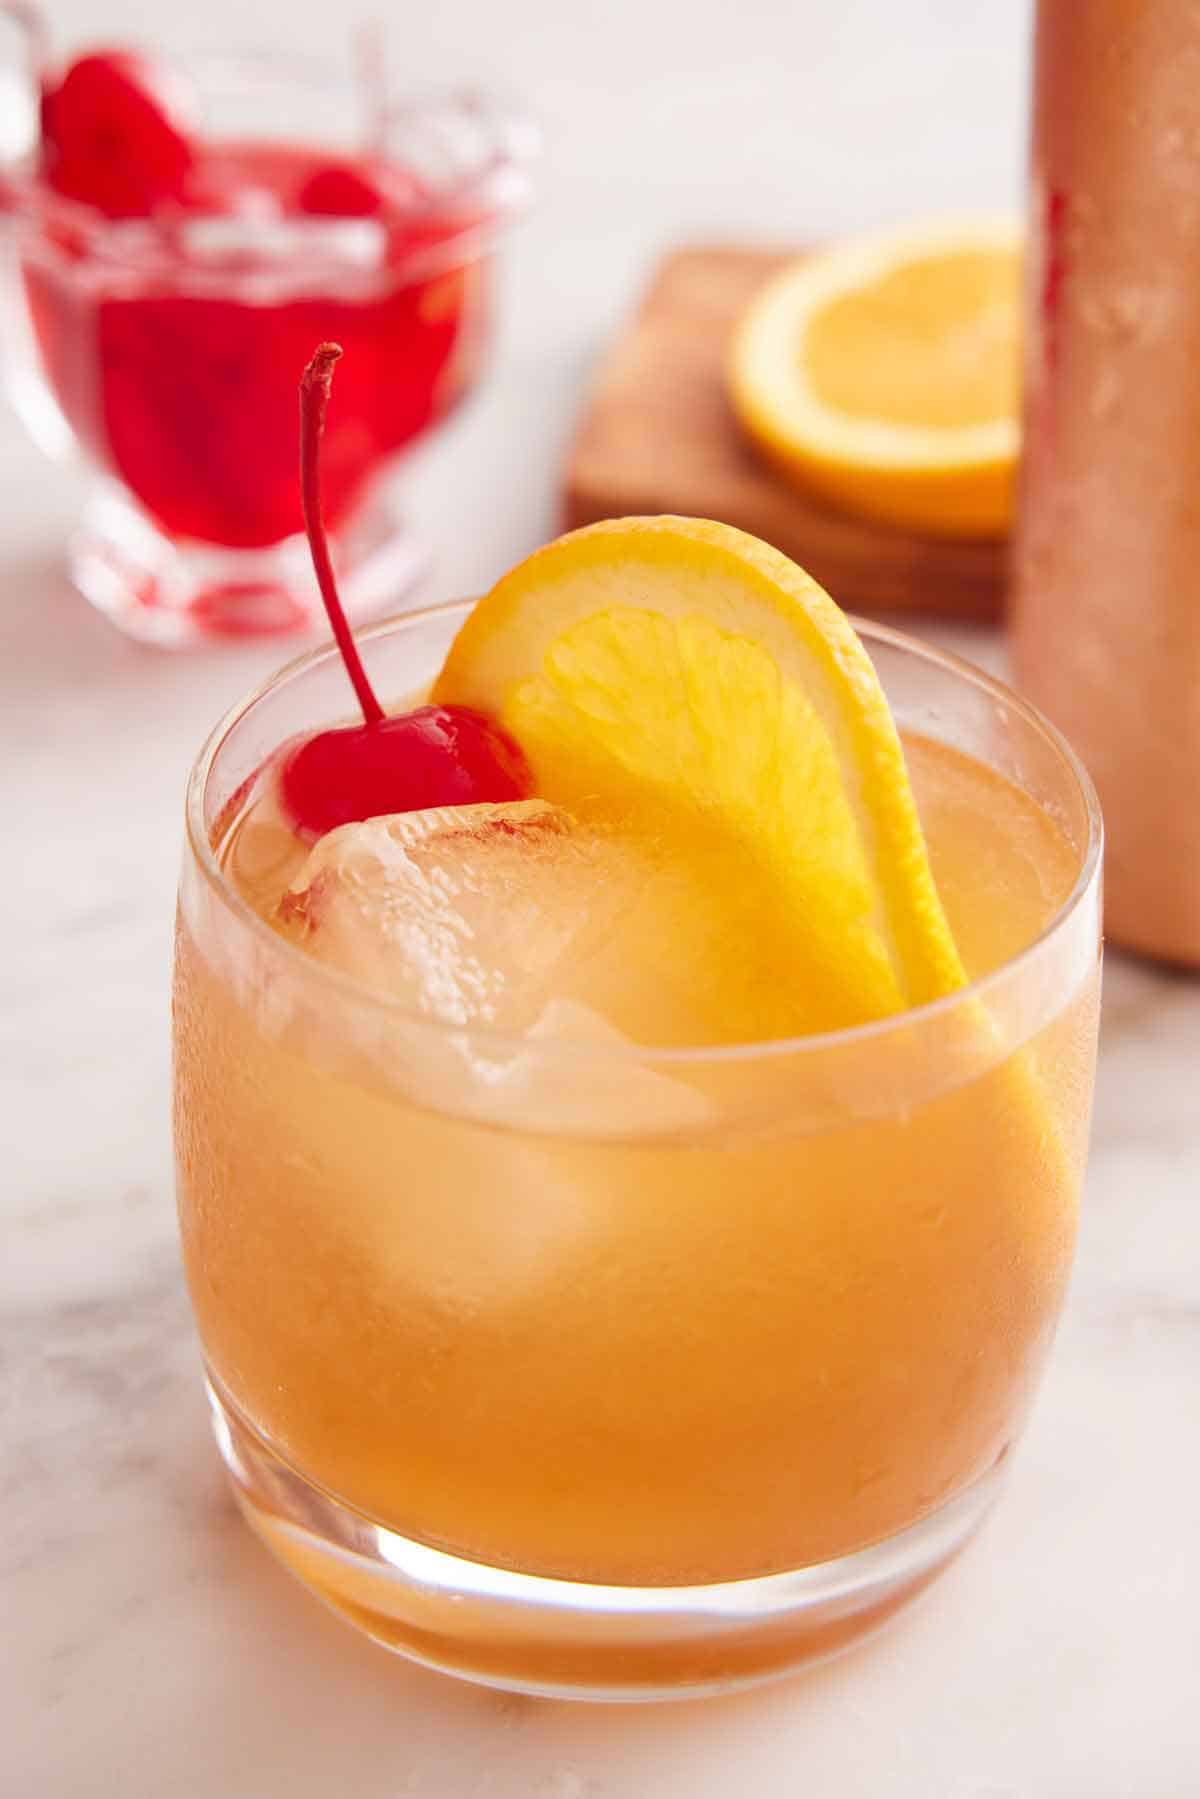 A glass of Amaretto Sour with a slice of orange and maraschino cherry.